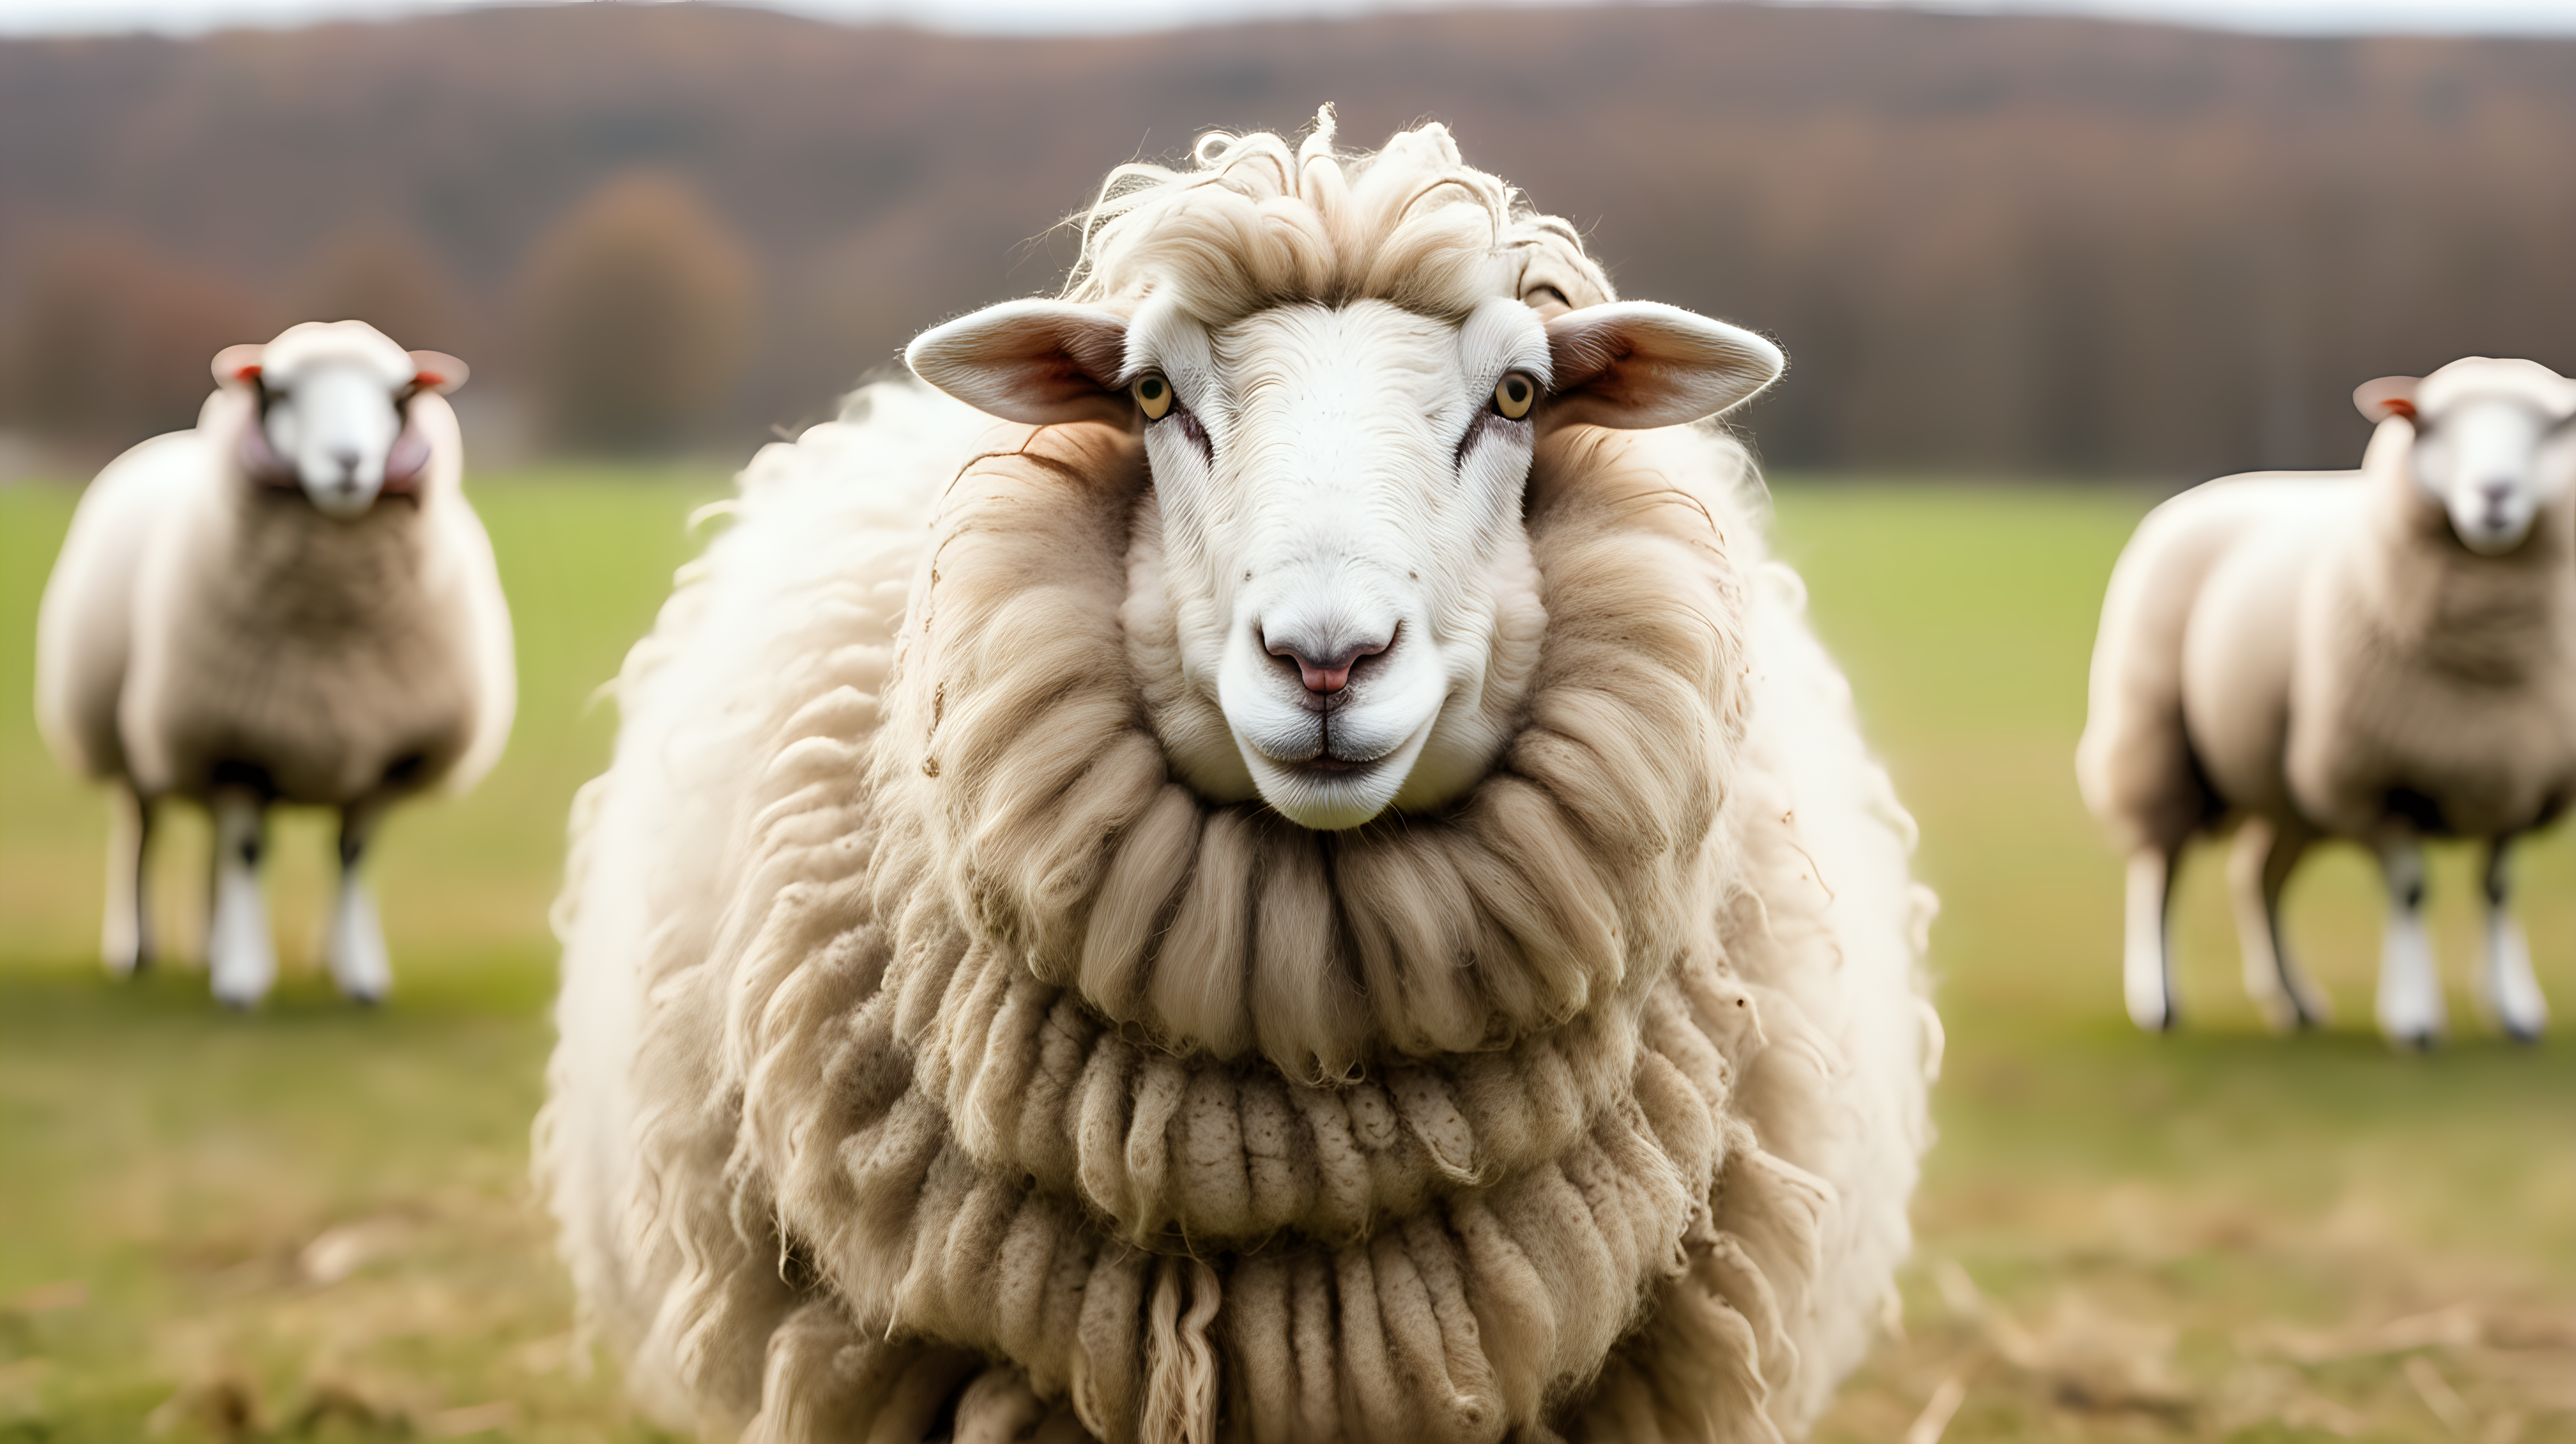 Portrait woolly sheep on the farm, isolated on field background, copy space, photo shoot